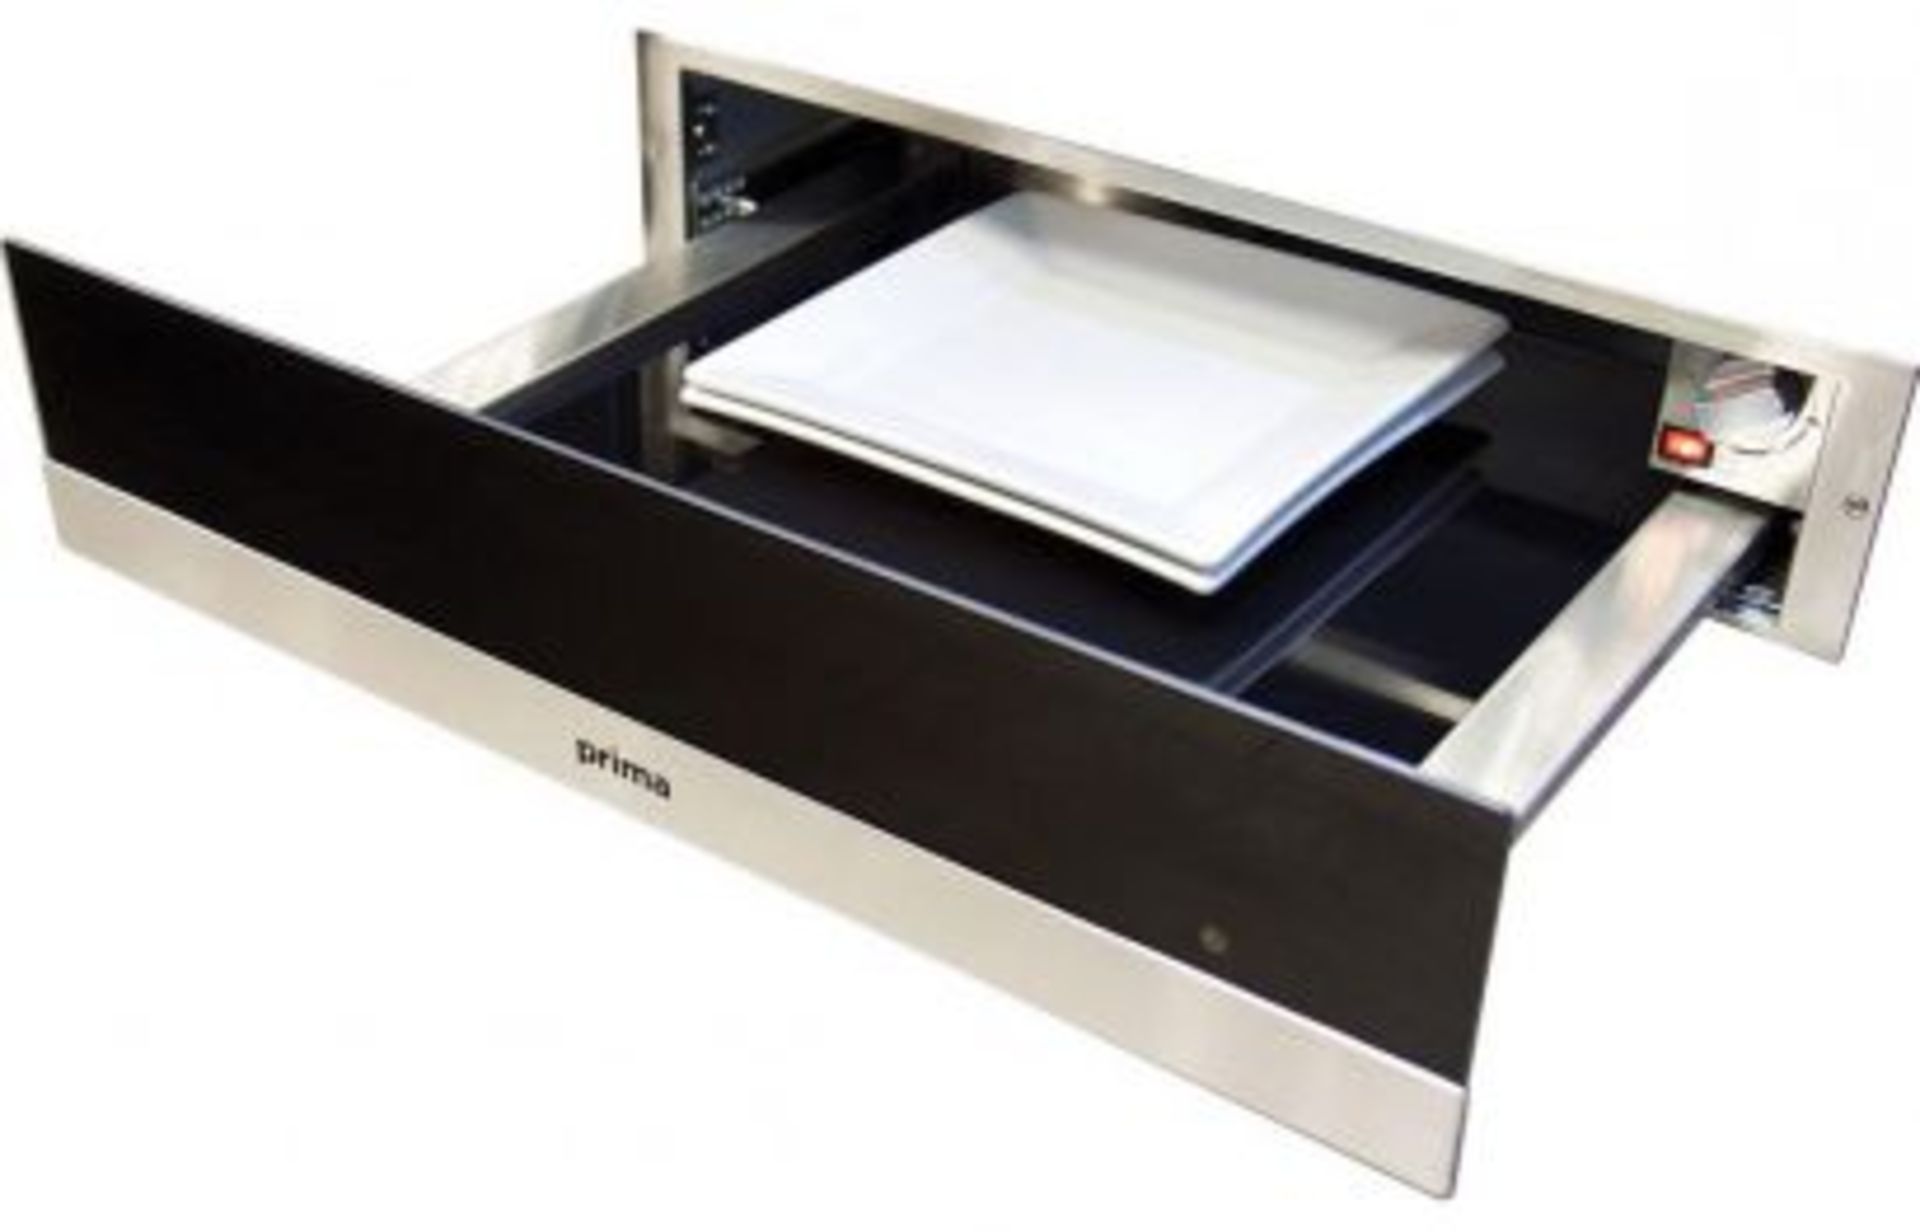 (A59) New Prima+ Integrated Warming Drawer 14cm - Stainless Steel (PRWD002). RRP £399.00. Prima+